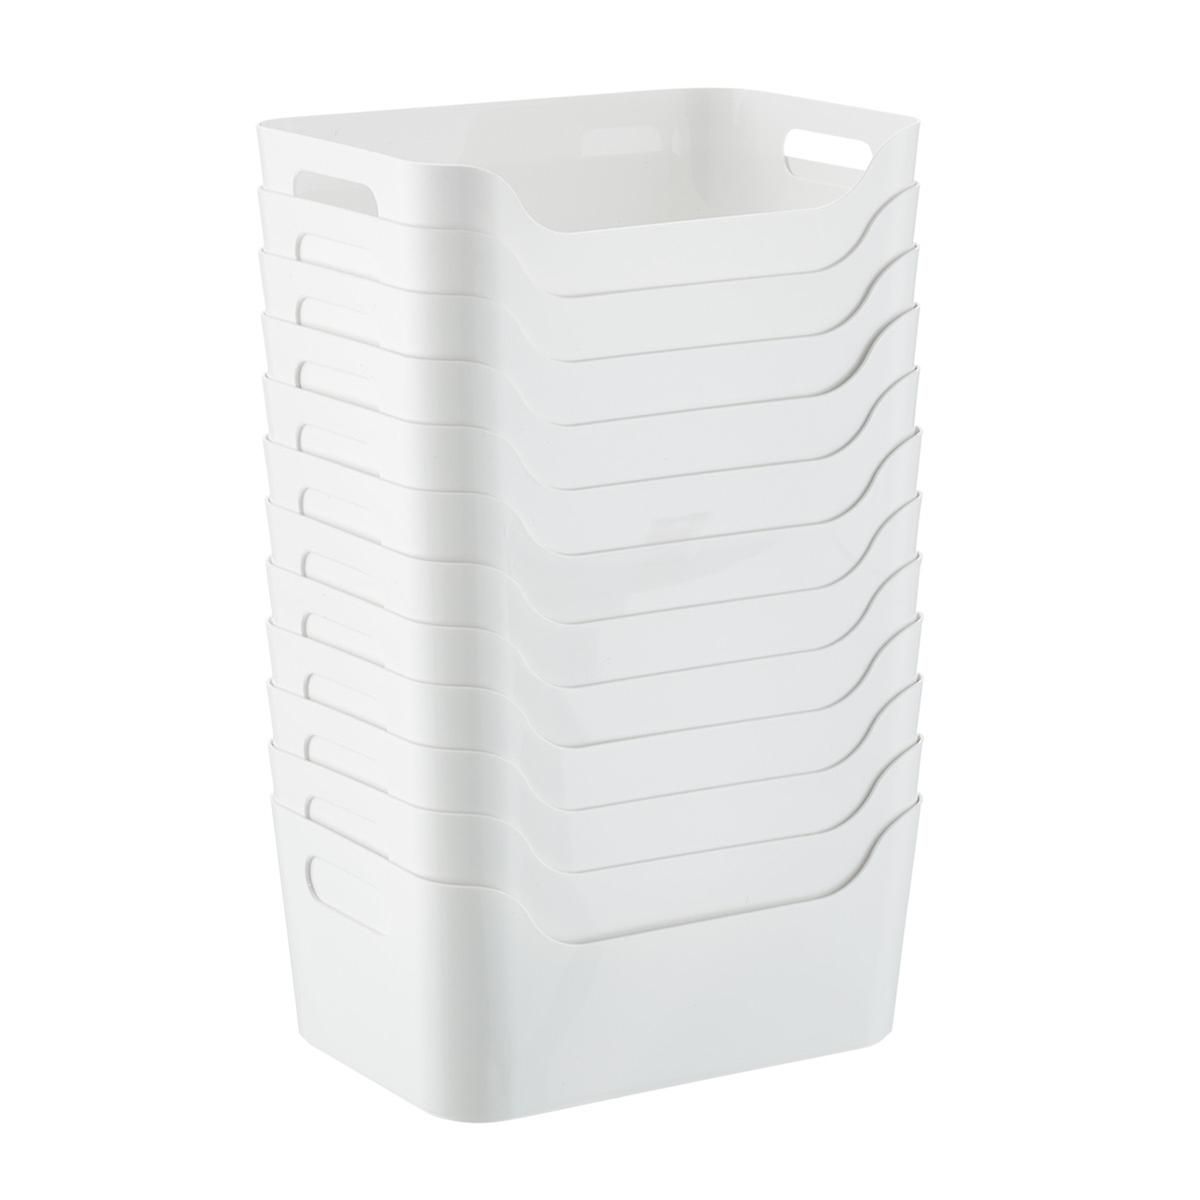 Case of 12 of White Plastic Storage Bins with Handles | The Container Store